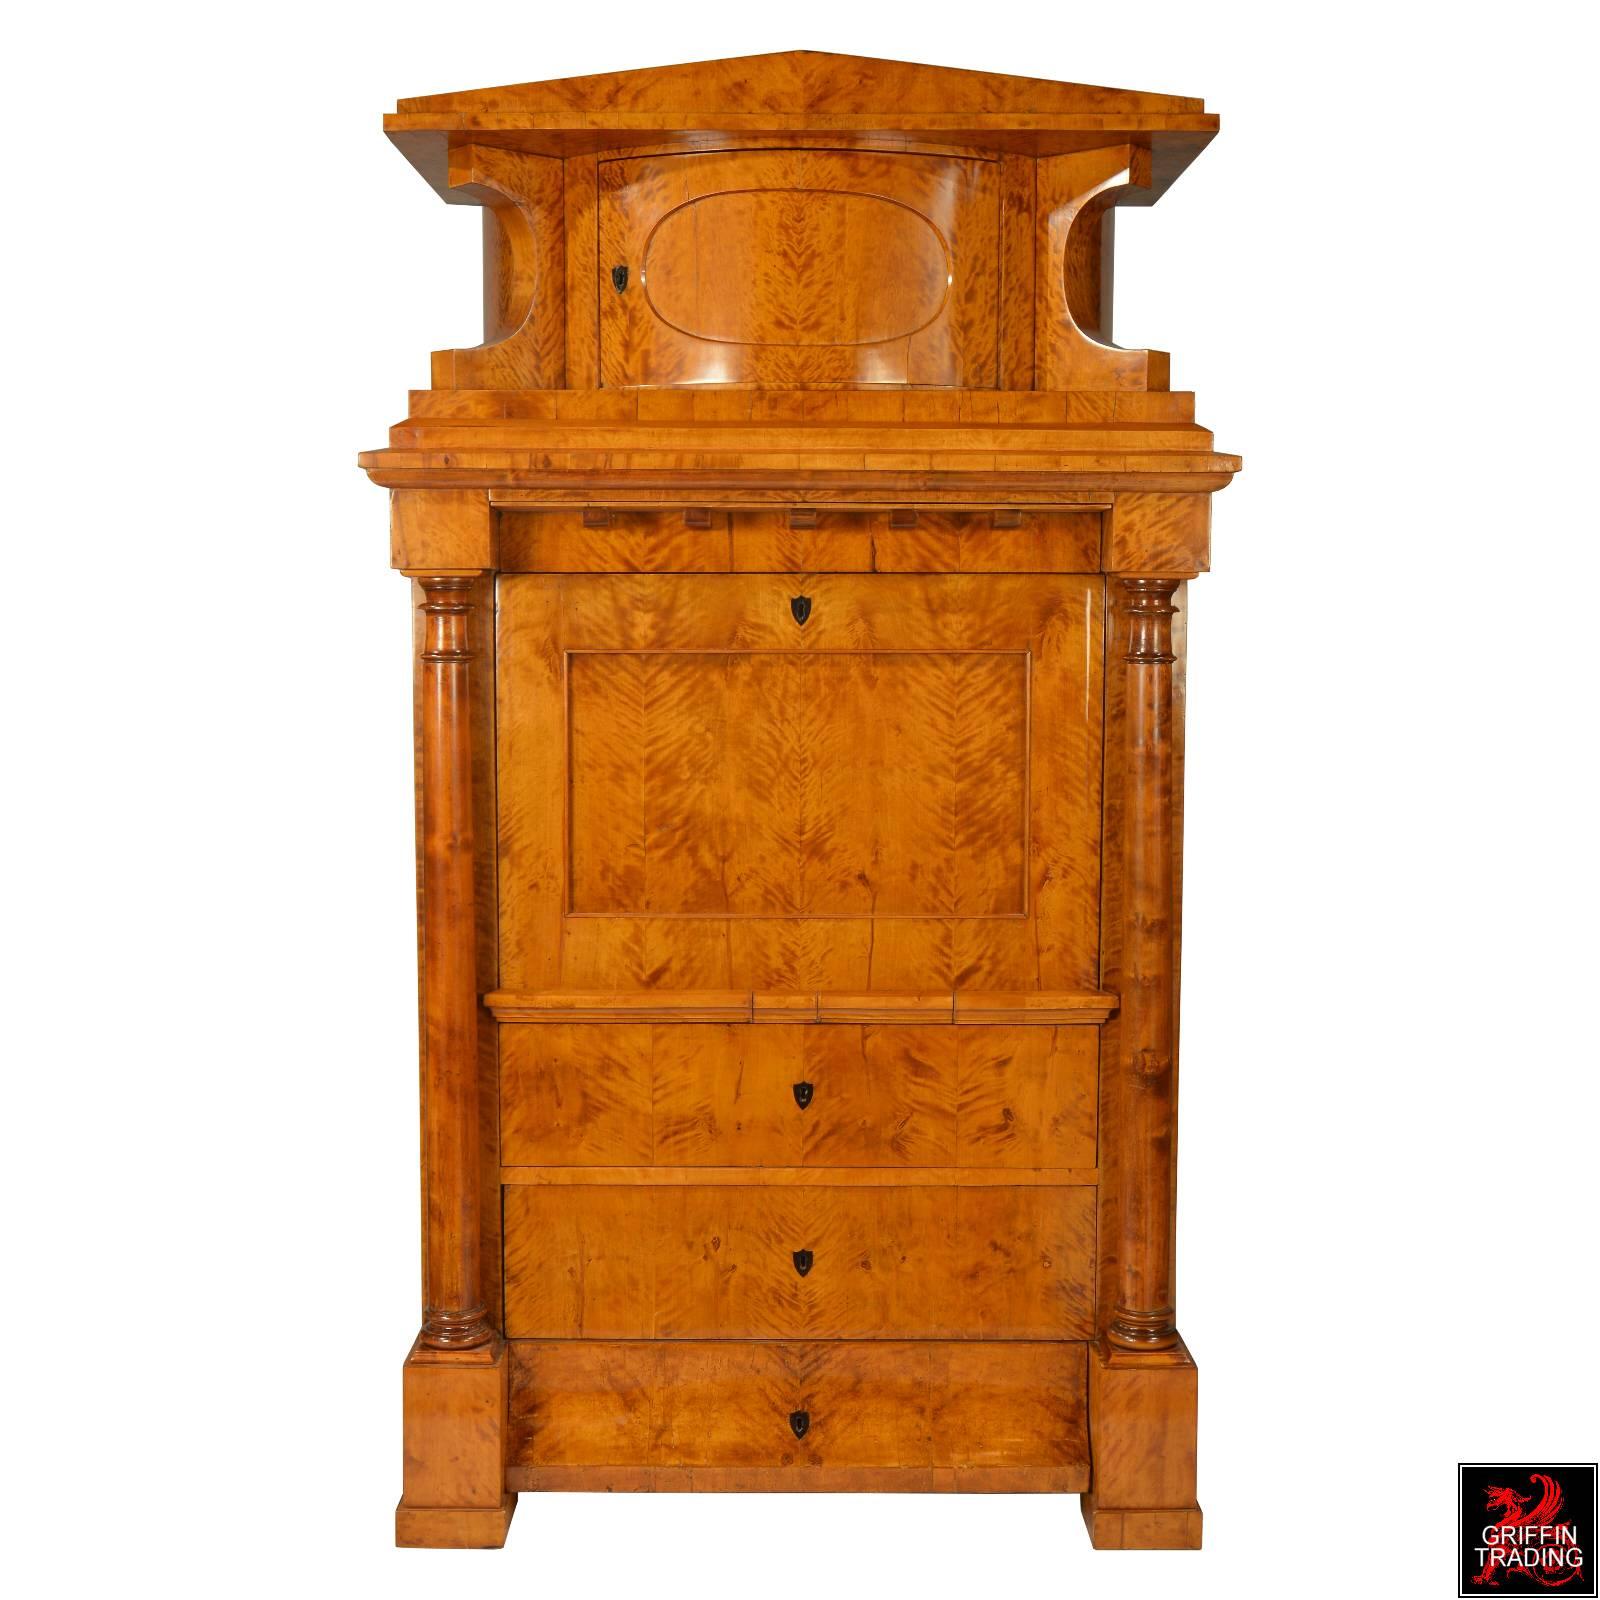 This magnificent Secrétaire à Abattant / Secretaire / Secretary is a fine example of period Biedermeier. Its strong distinctive architectural lines and beautiful flame birch veneer finish, implies that it was made in Northern Germany and dates circa